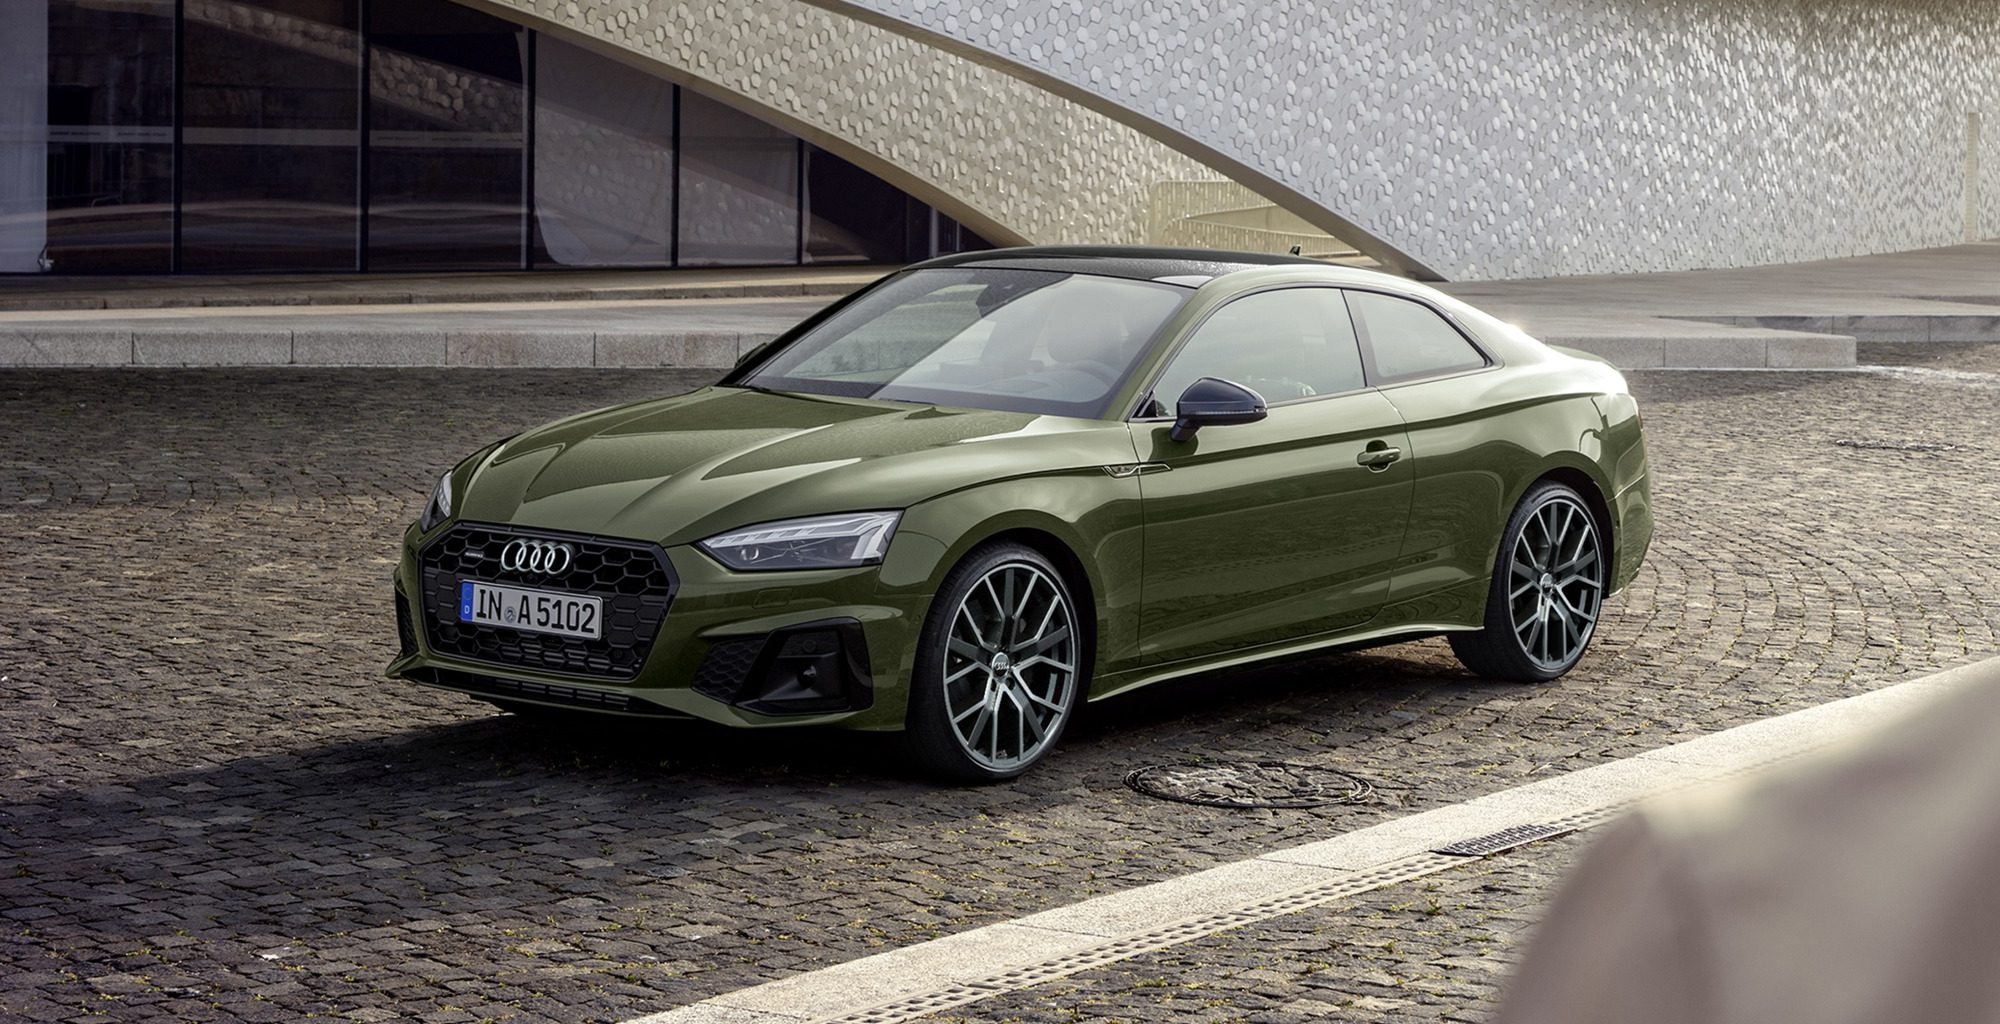 Olive Green Audi A5 Coupe in ubran setting